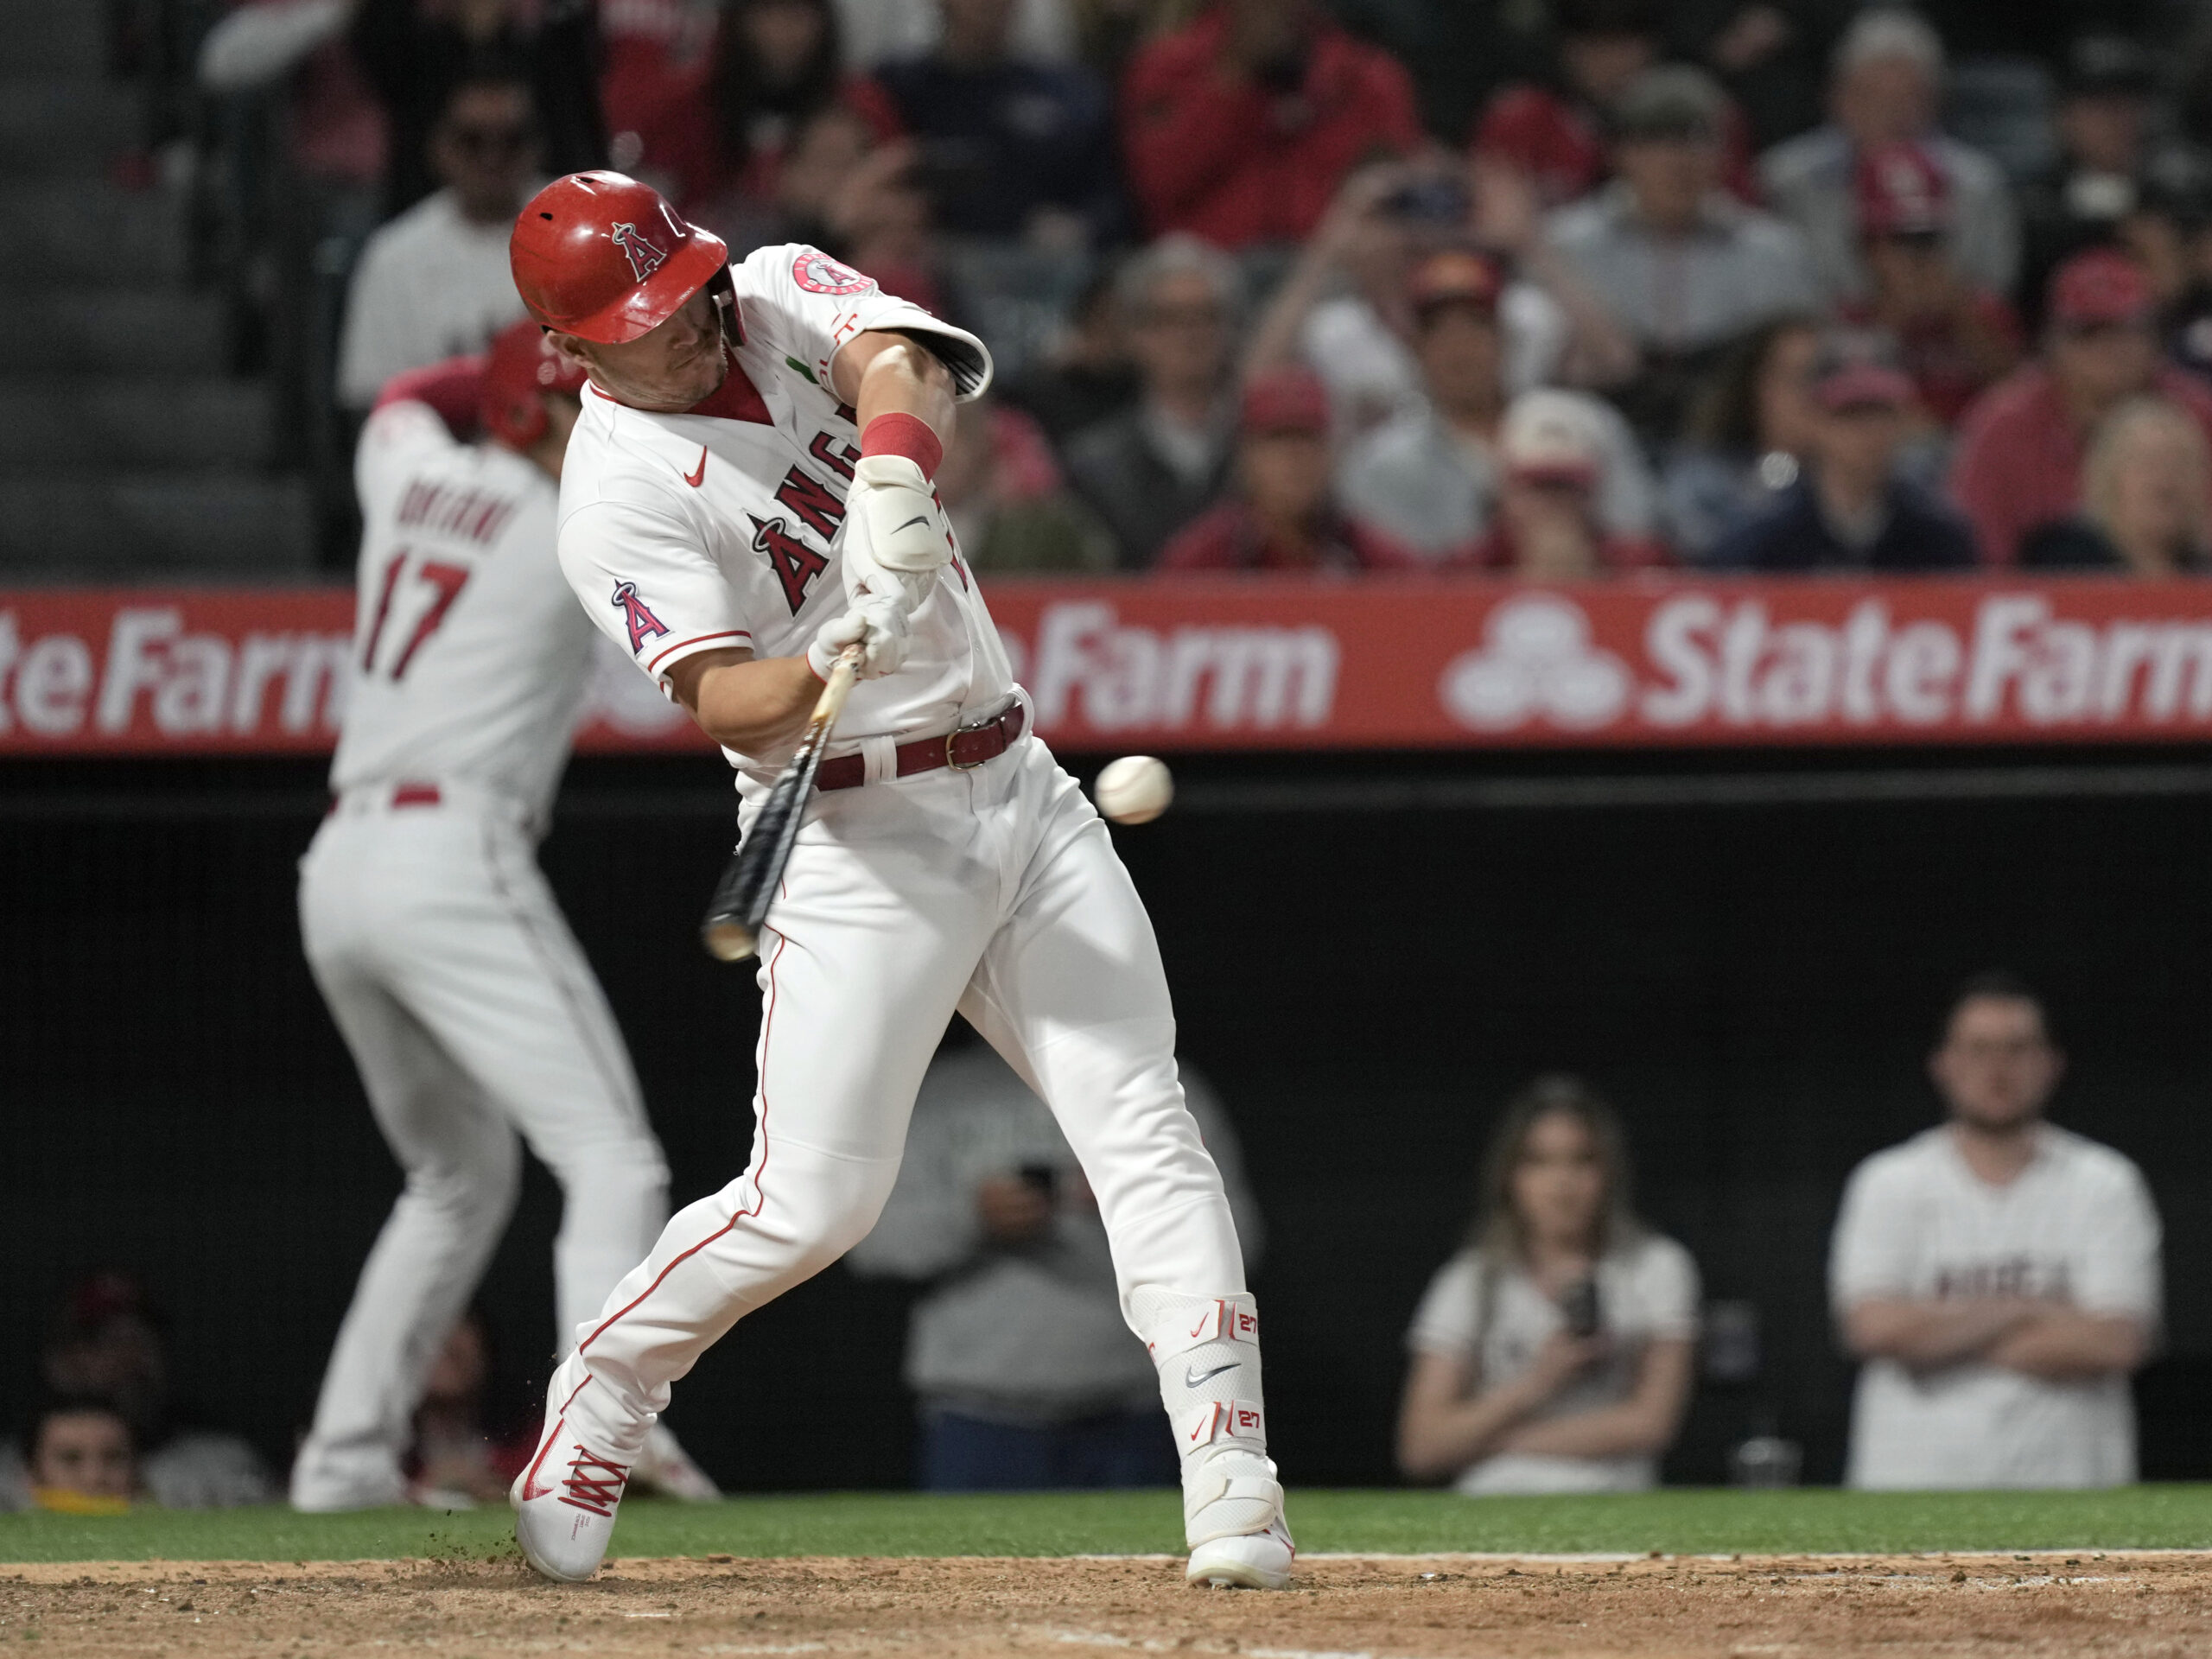 Mike Trout's season over because of wrist injury, played in just 82 games  for Angels – KGET 17